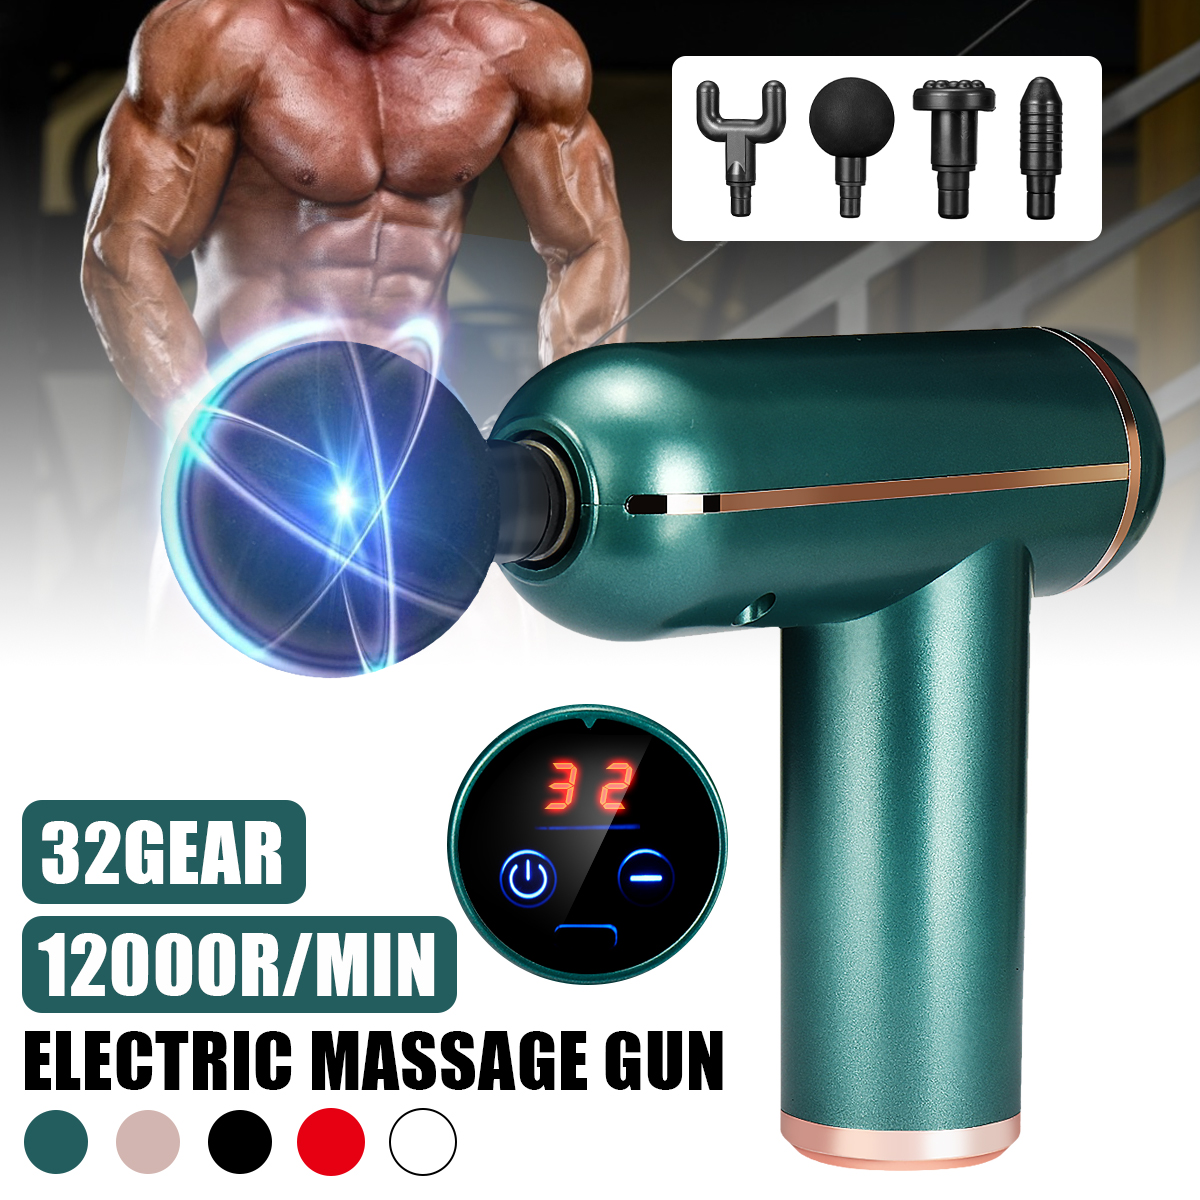 632-Gears-Electric-Percussion-Massage-Guns-Deep-Tissue-Relaxing-Muscle-Vibration-Massager-Pain-Relie-1874517-2